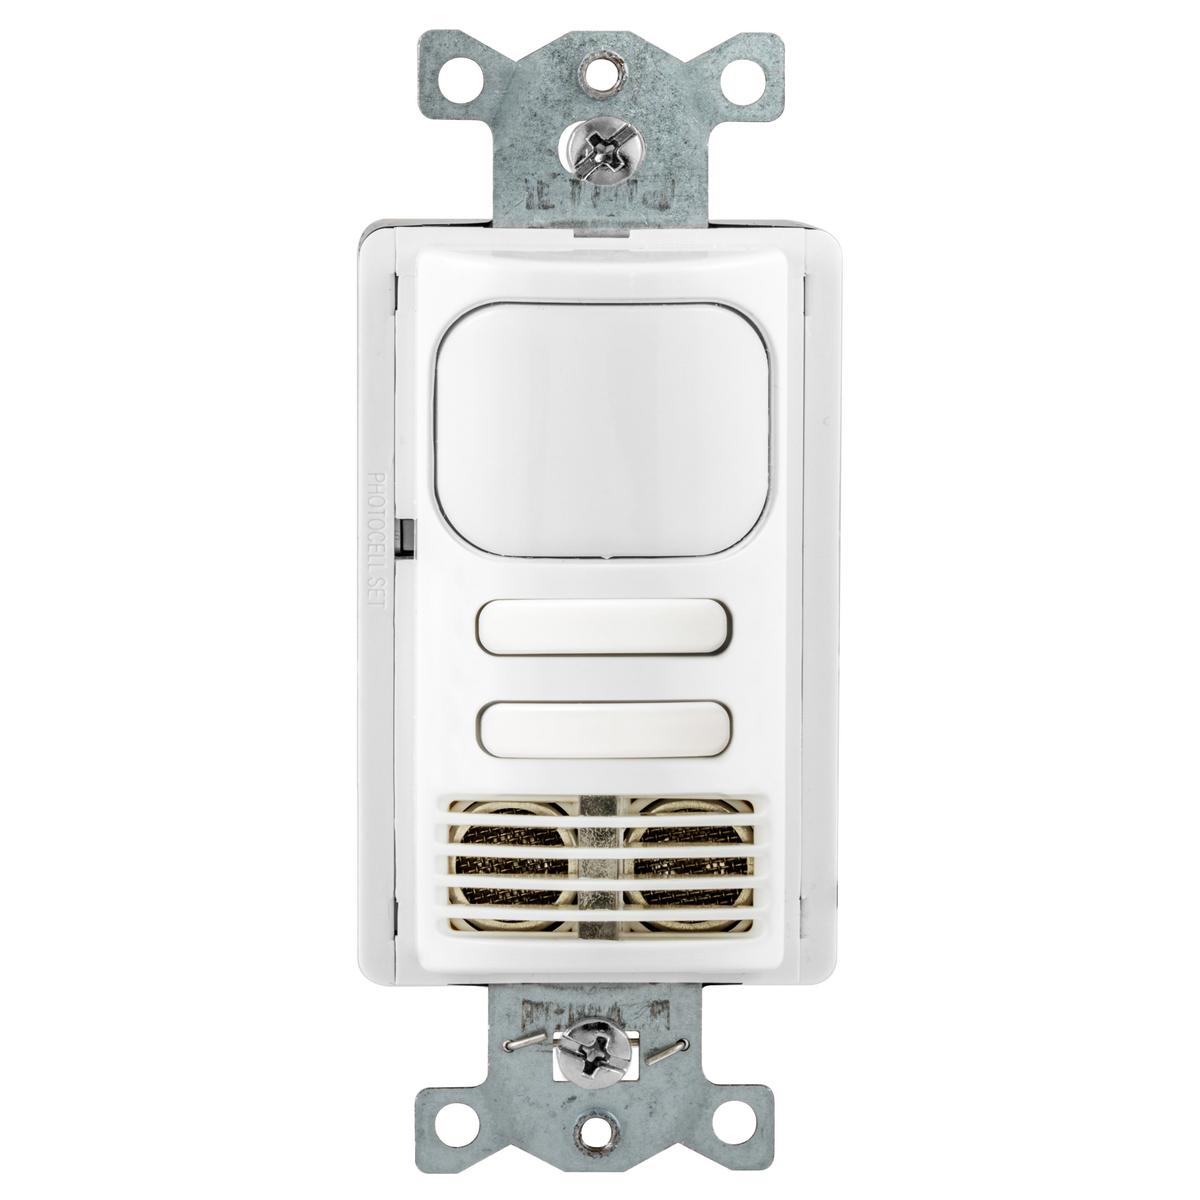 Hubbell MSD2001W2 Occupancy Sensing Products, Wall Switch, Occupancy or Vacancy, Dual Tech, 2 Relay, 1000 Square Feet, 800W Incandescent, 1000W Fluorescent @ 120V AC, 1800W  Fluorescent @ 277V 